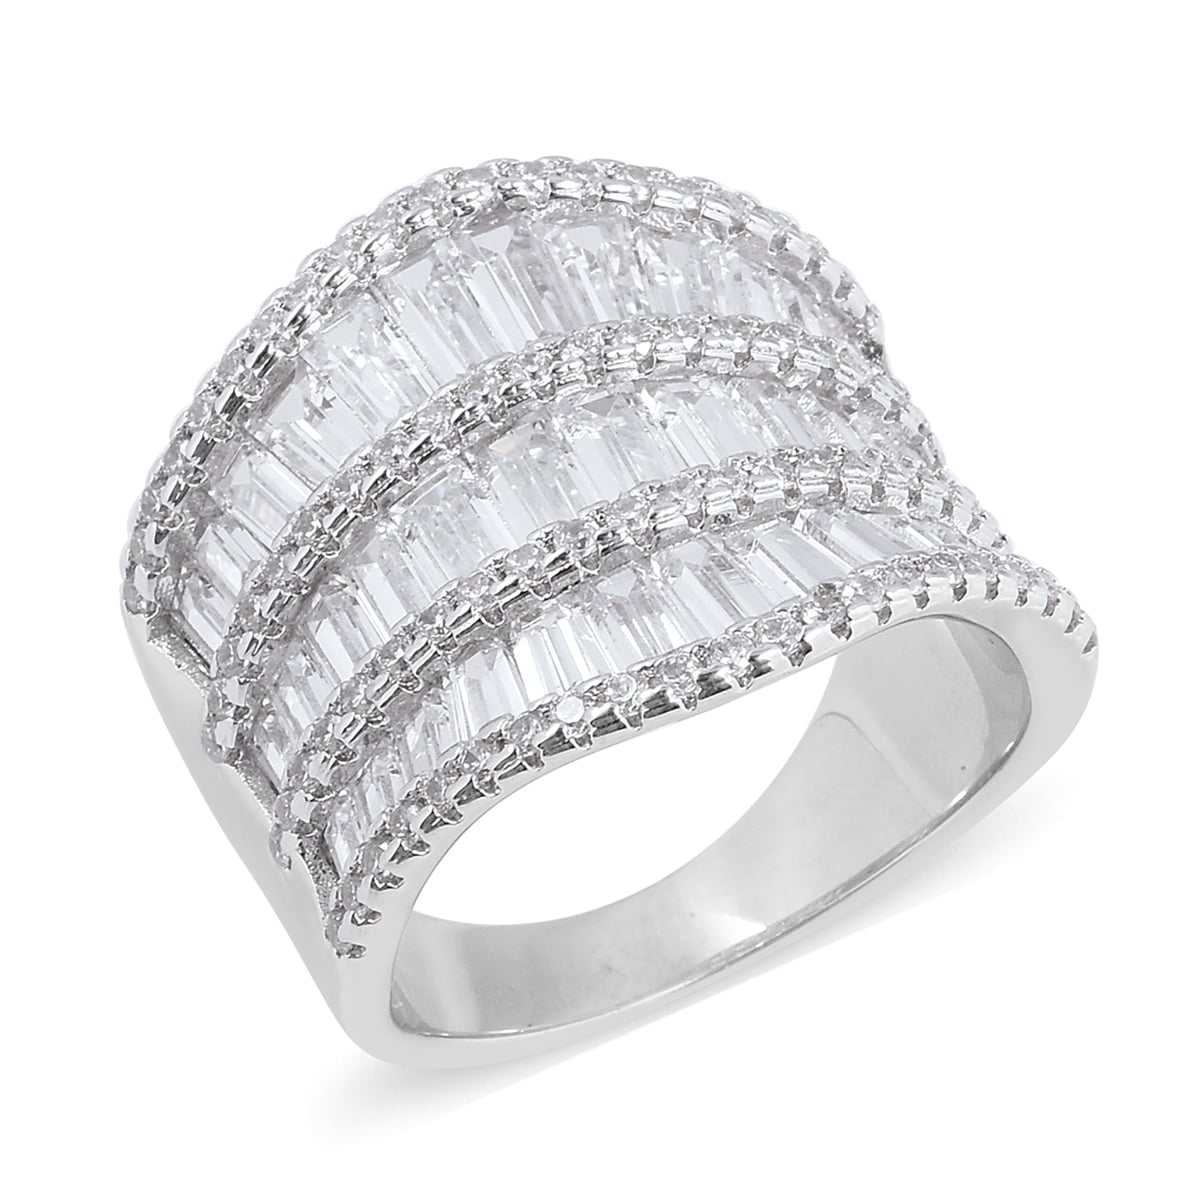 Shop LC Cluster Ring Baguette White Cubic Zirconia CZ for Women Ct 5.